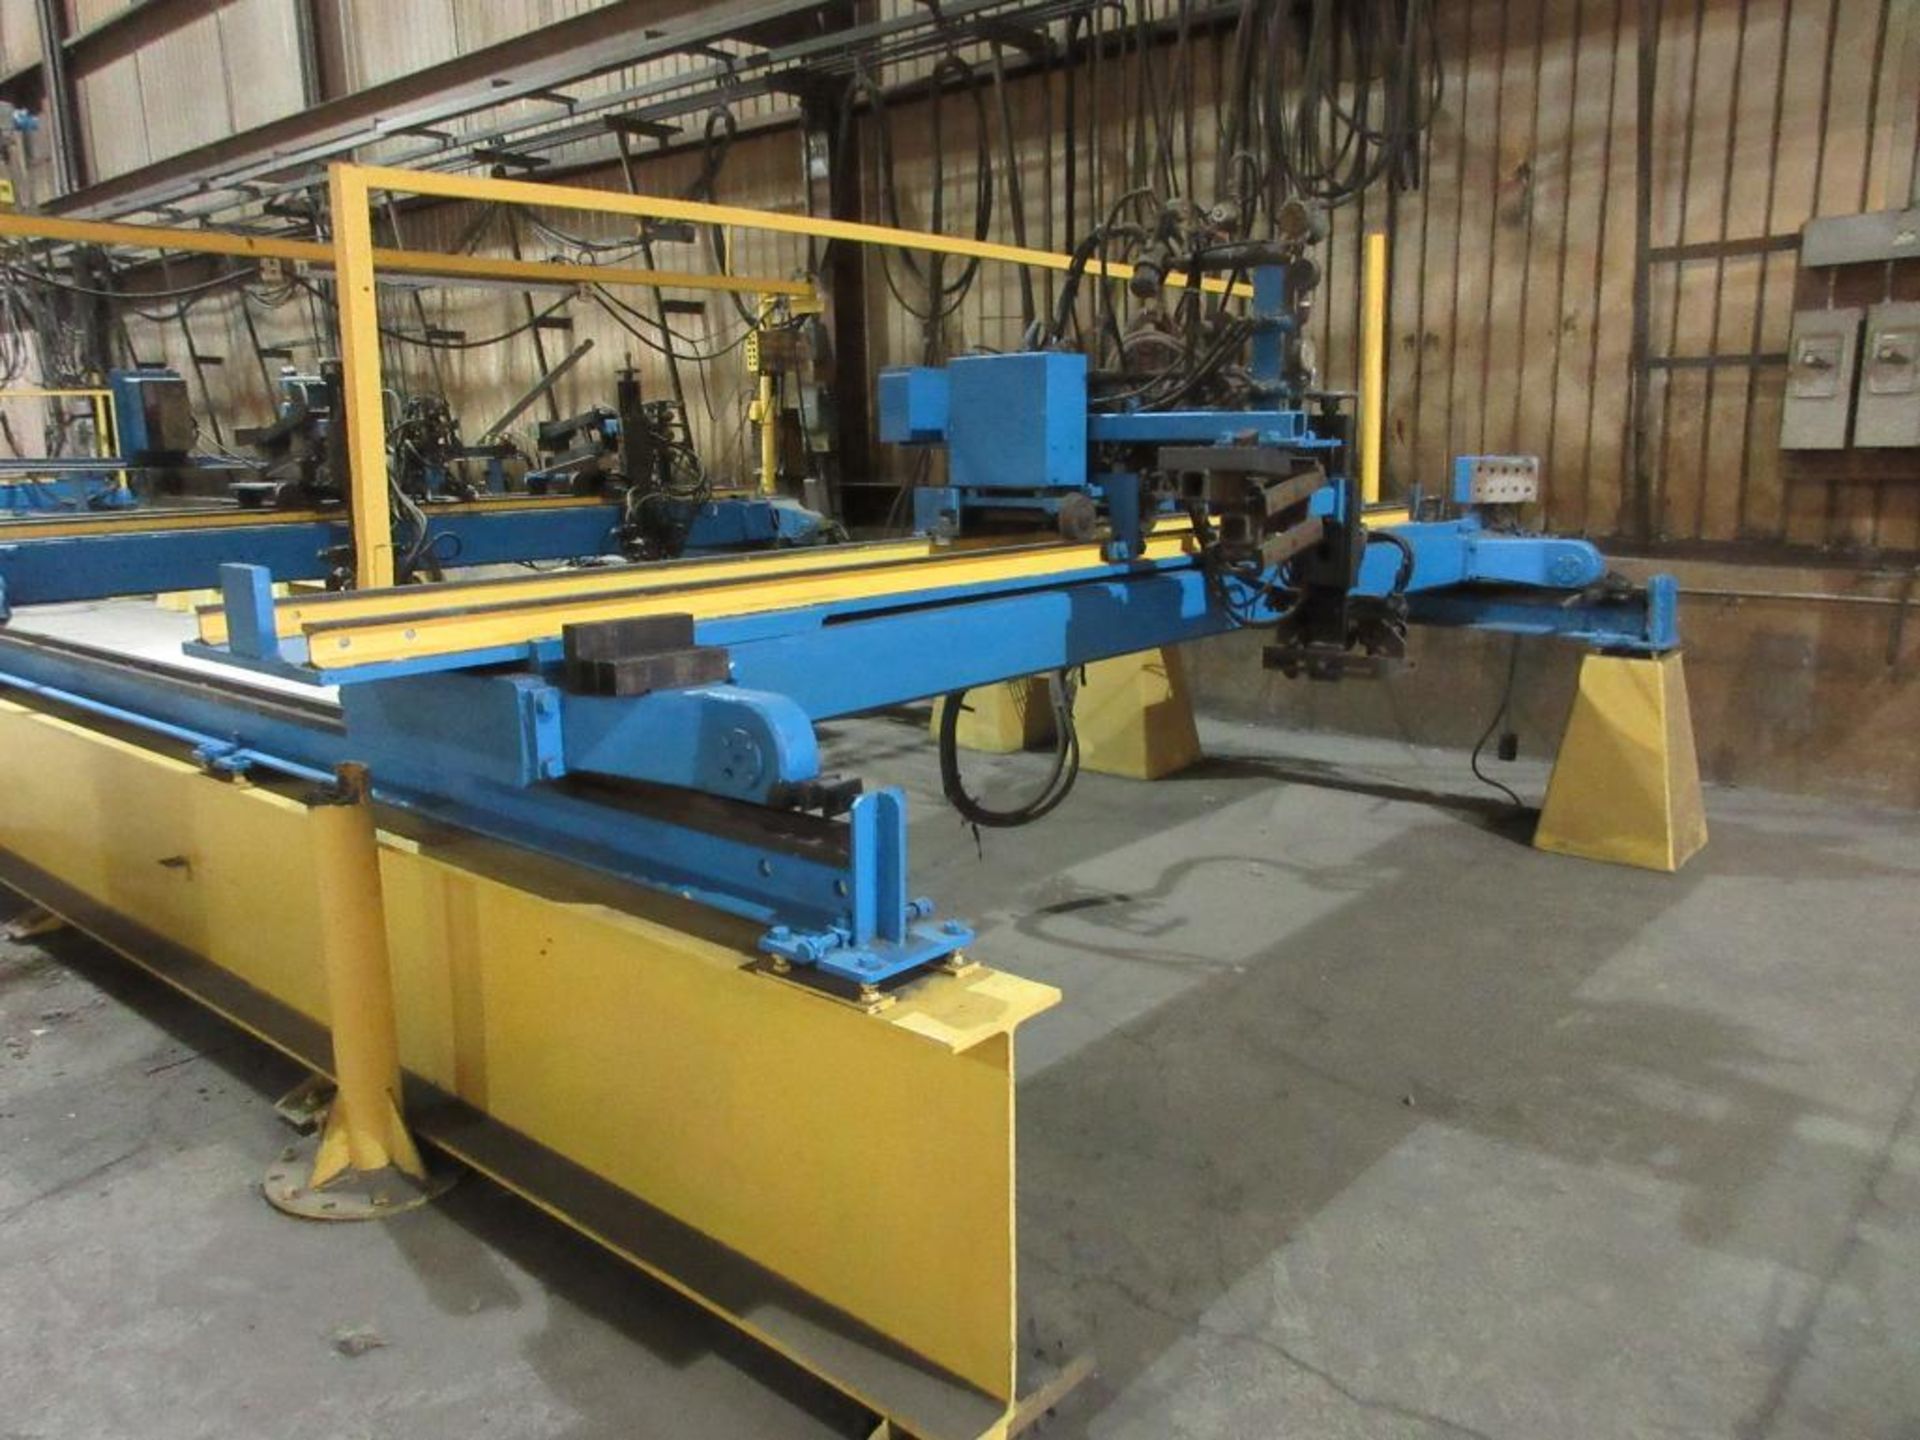 PANDJRIS CUTTING TABLE, 12'W X 66'L APPROX, WITH 3 12' BRIDGES, 3 TORCHES, TROLLIES, WALL MOUNTED WI - Image 7 of 11